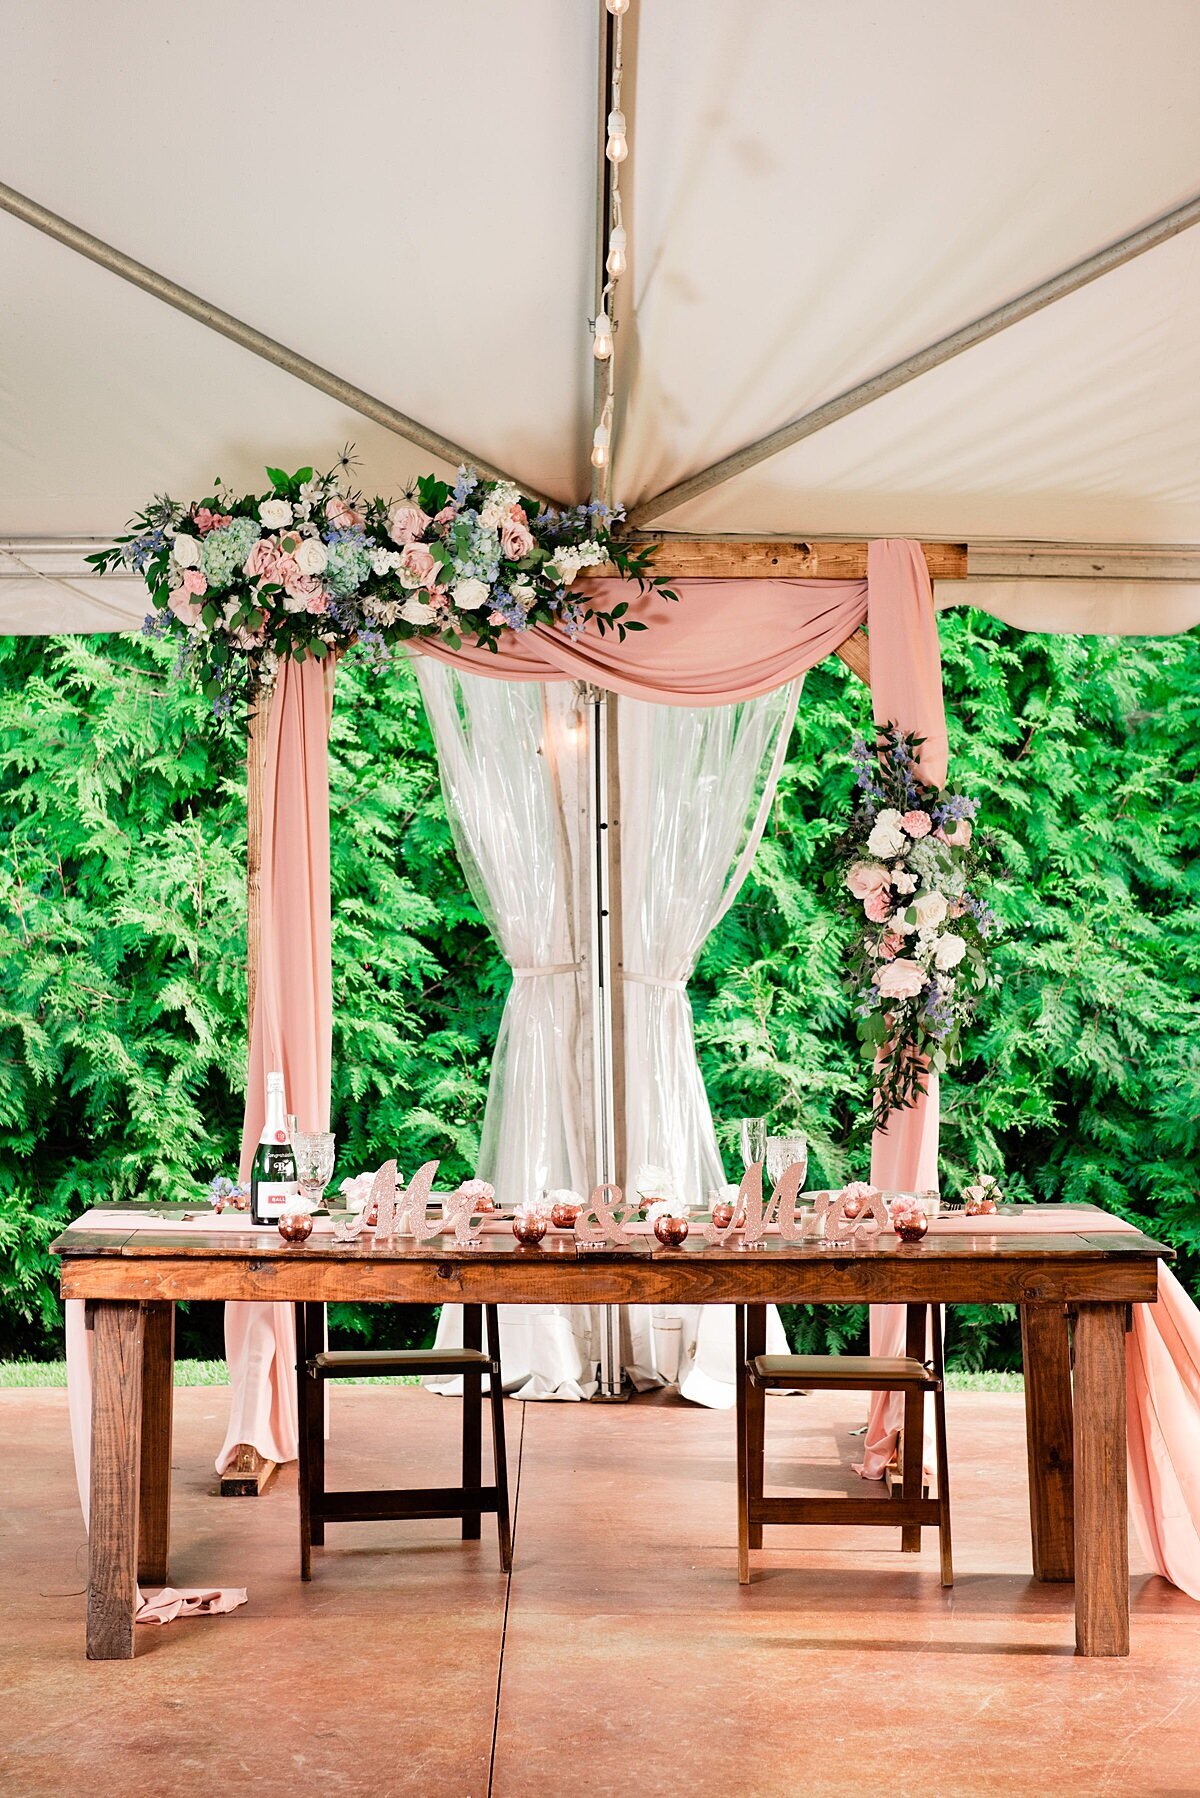 A barn wood farm table sits under a white wedding tent with a wooden arbor behind the table. The arbor is decorated with blush pink drapery  and two large floral sprays with grey dusty miller, white roses, white hydrangea, blush roses and eucalyptus.